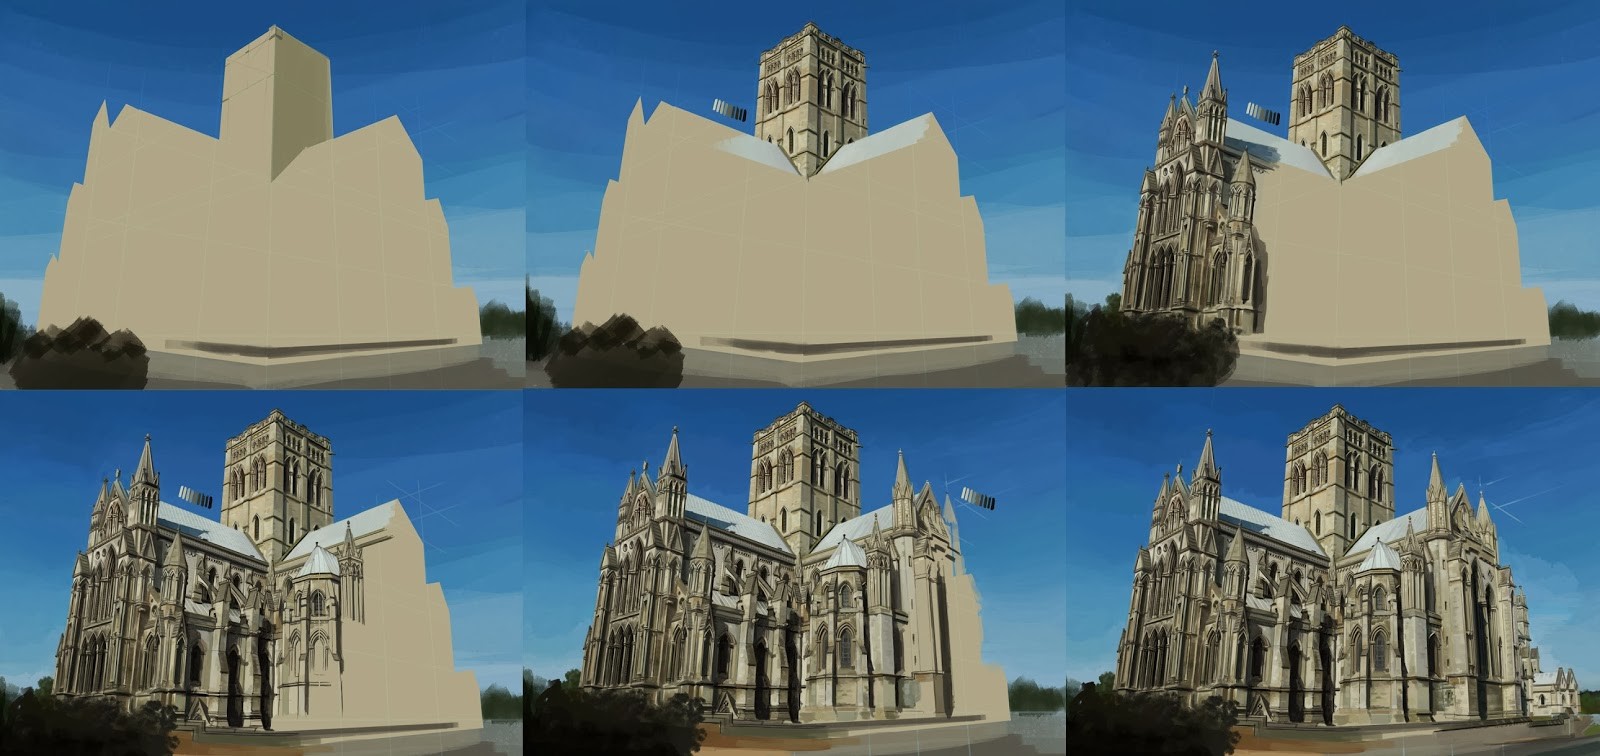 Cathedral Study breakdown